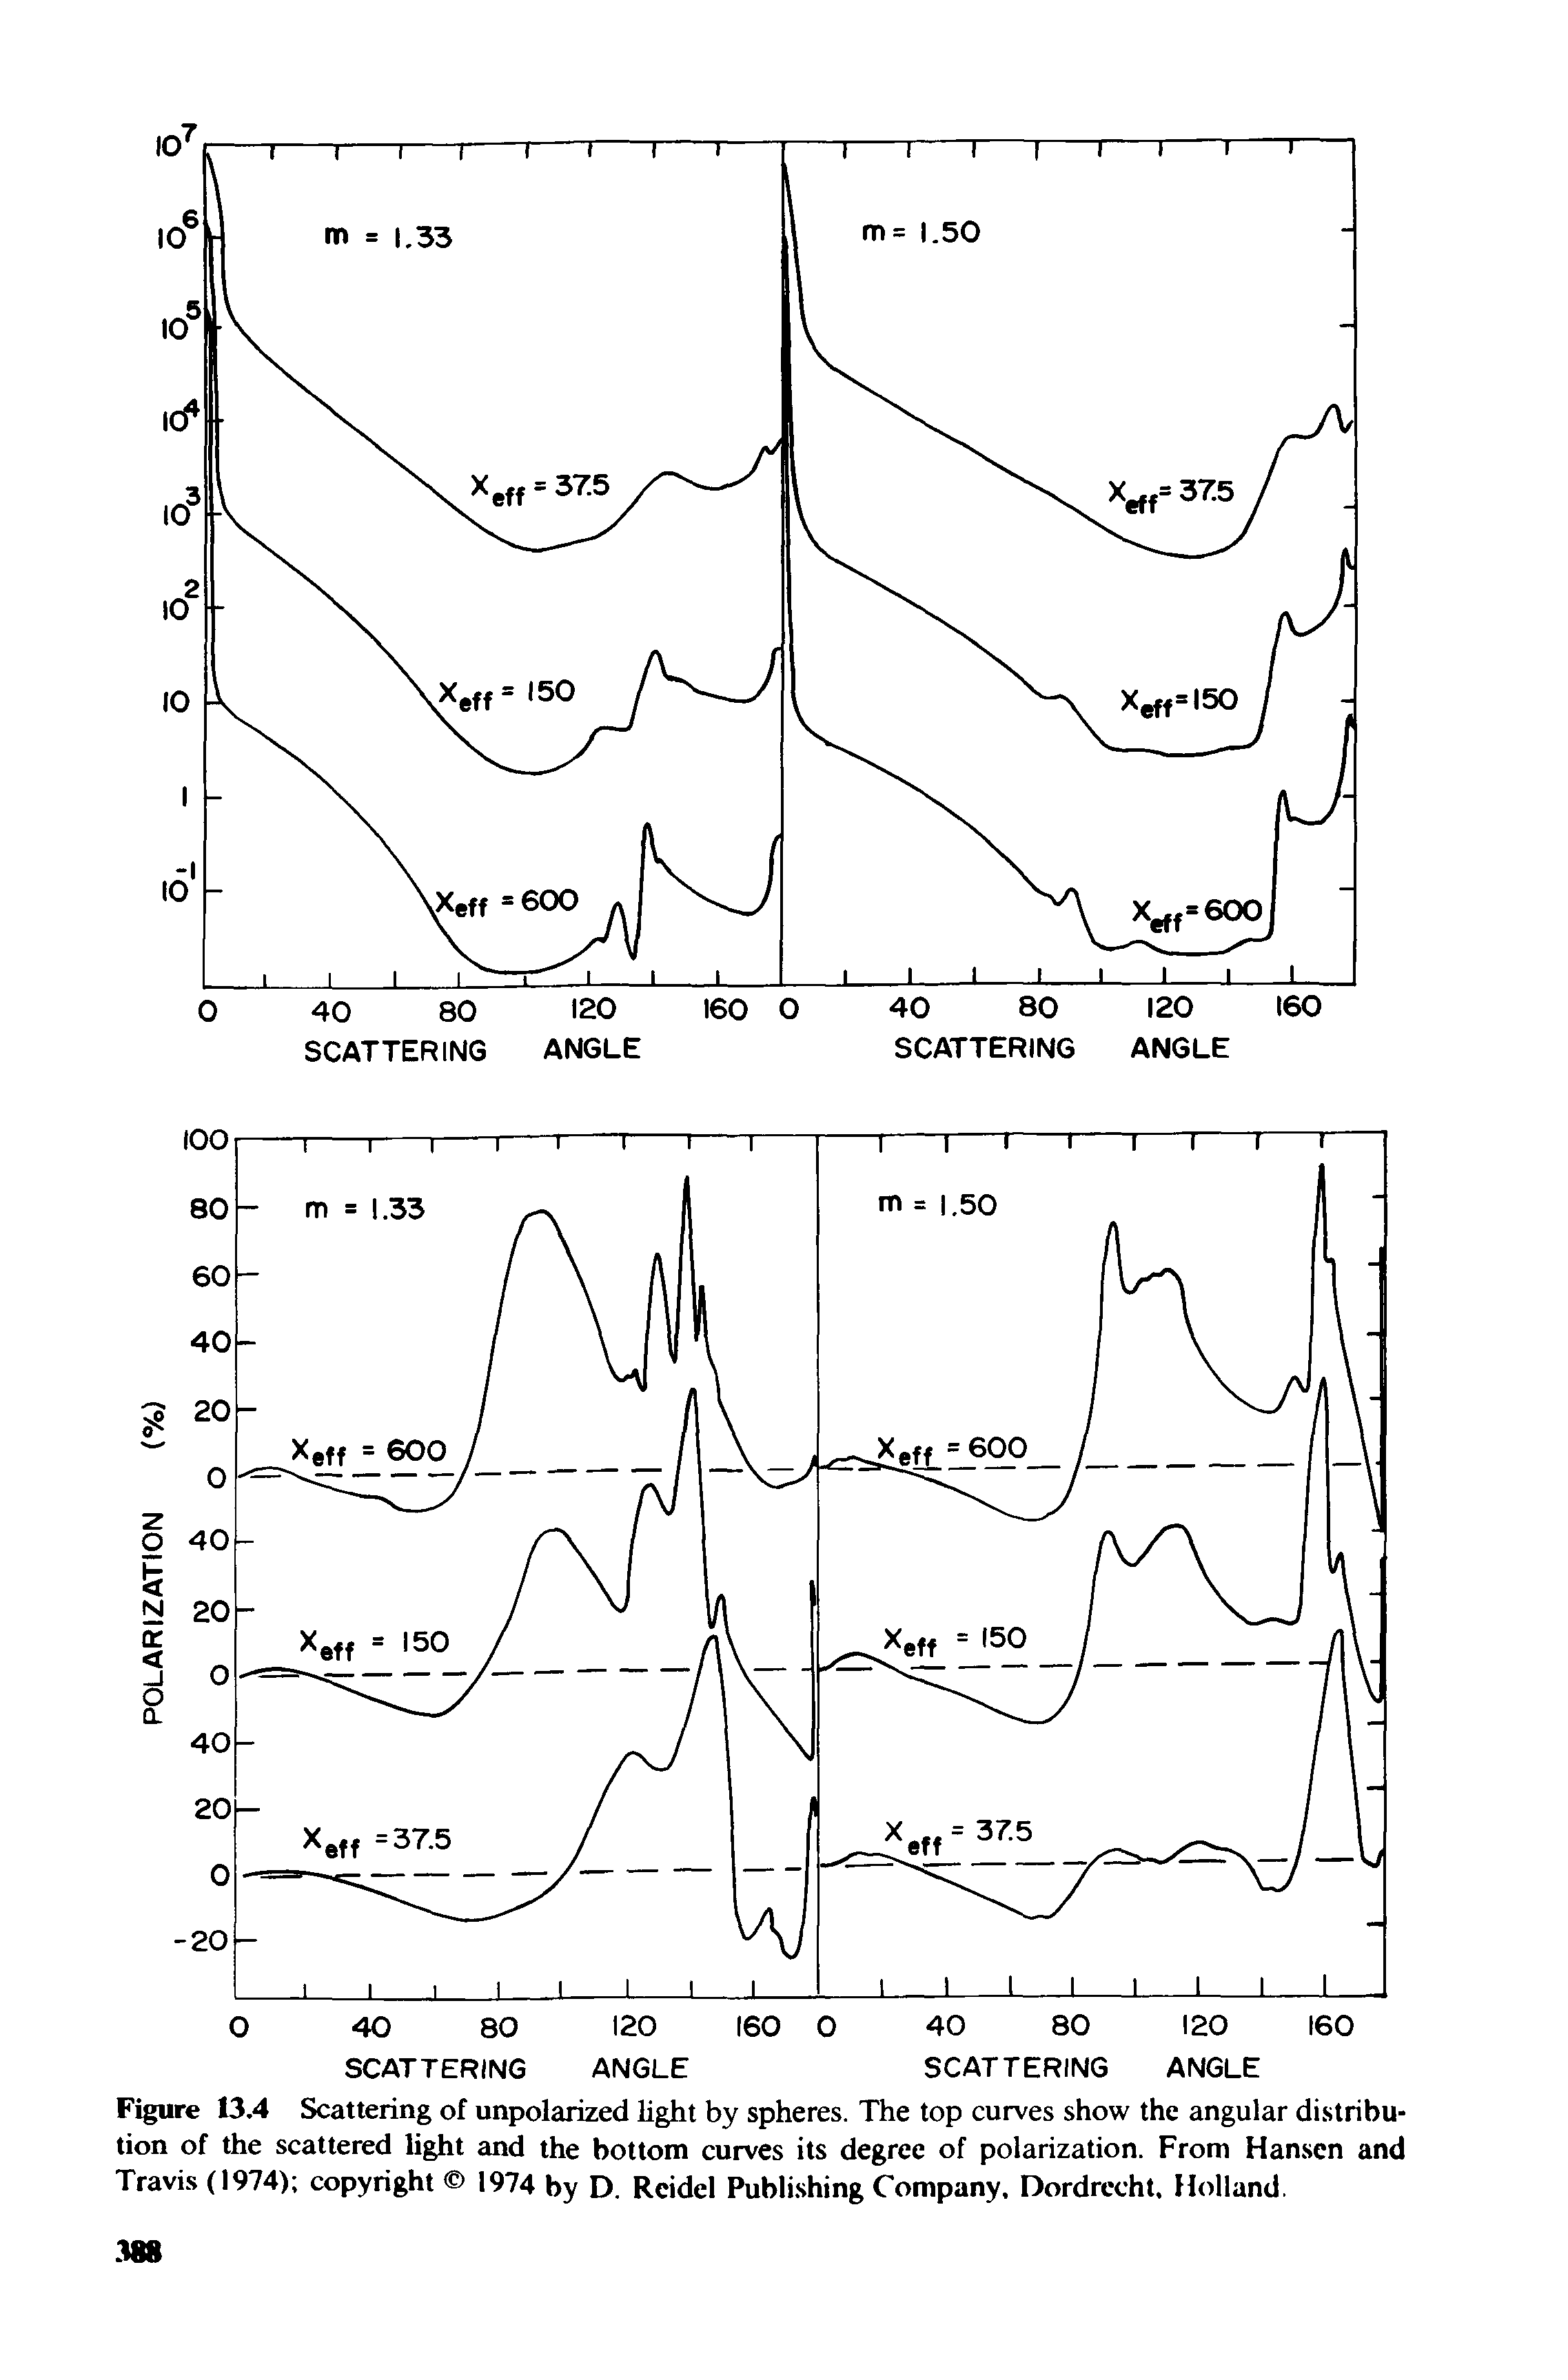 Figure 13.4 Scattering of unpolarized light by spheres. The top curves show the angular distribution of the scattered light and the bottom curves its degree of polarization. From Hansen and Travis (1974) copyright 1974 by D. Rcidel Publishing Company. Dordrecht. Holland.